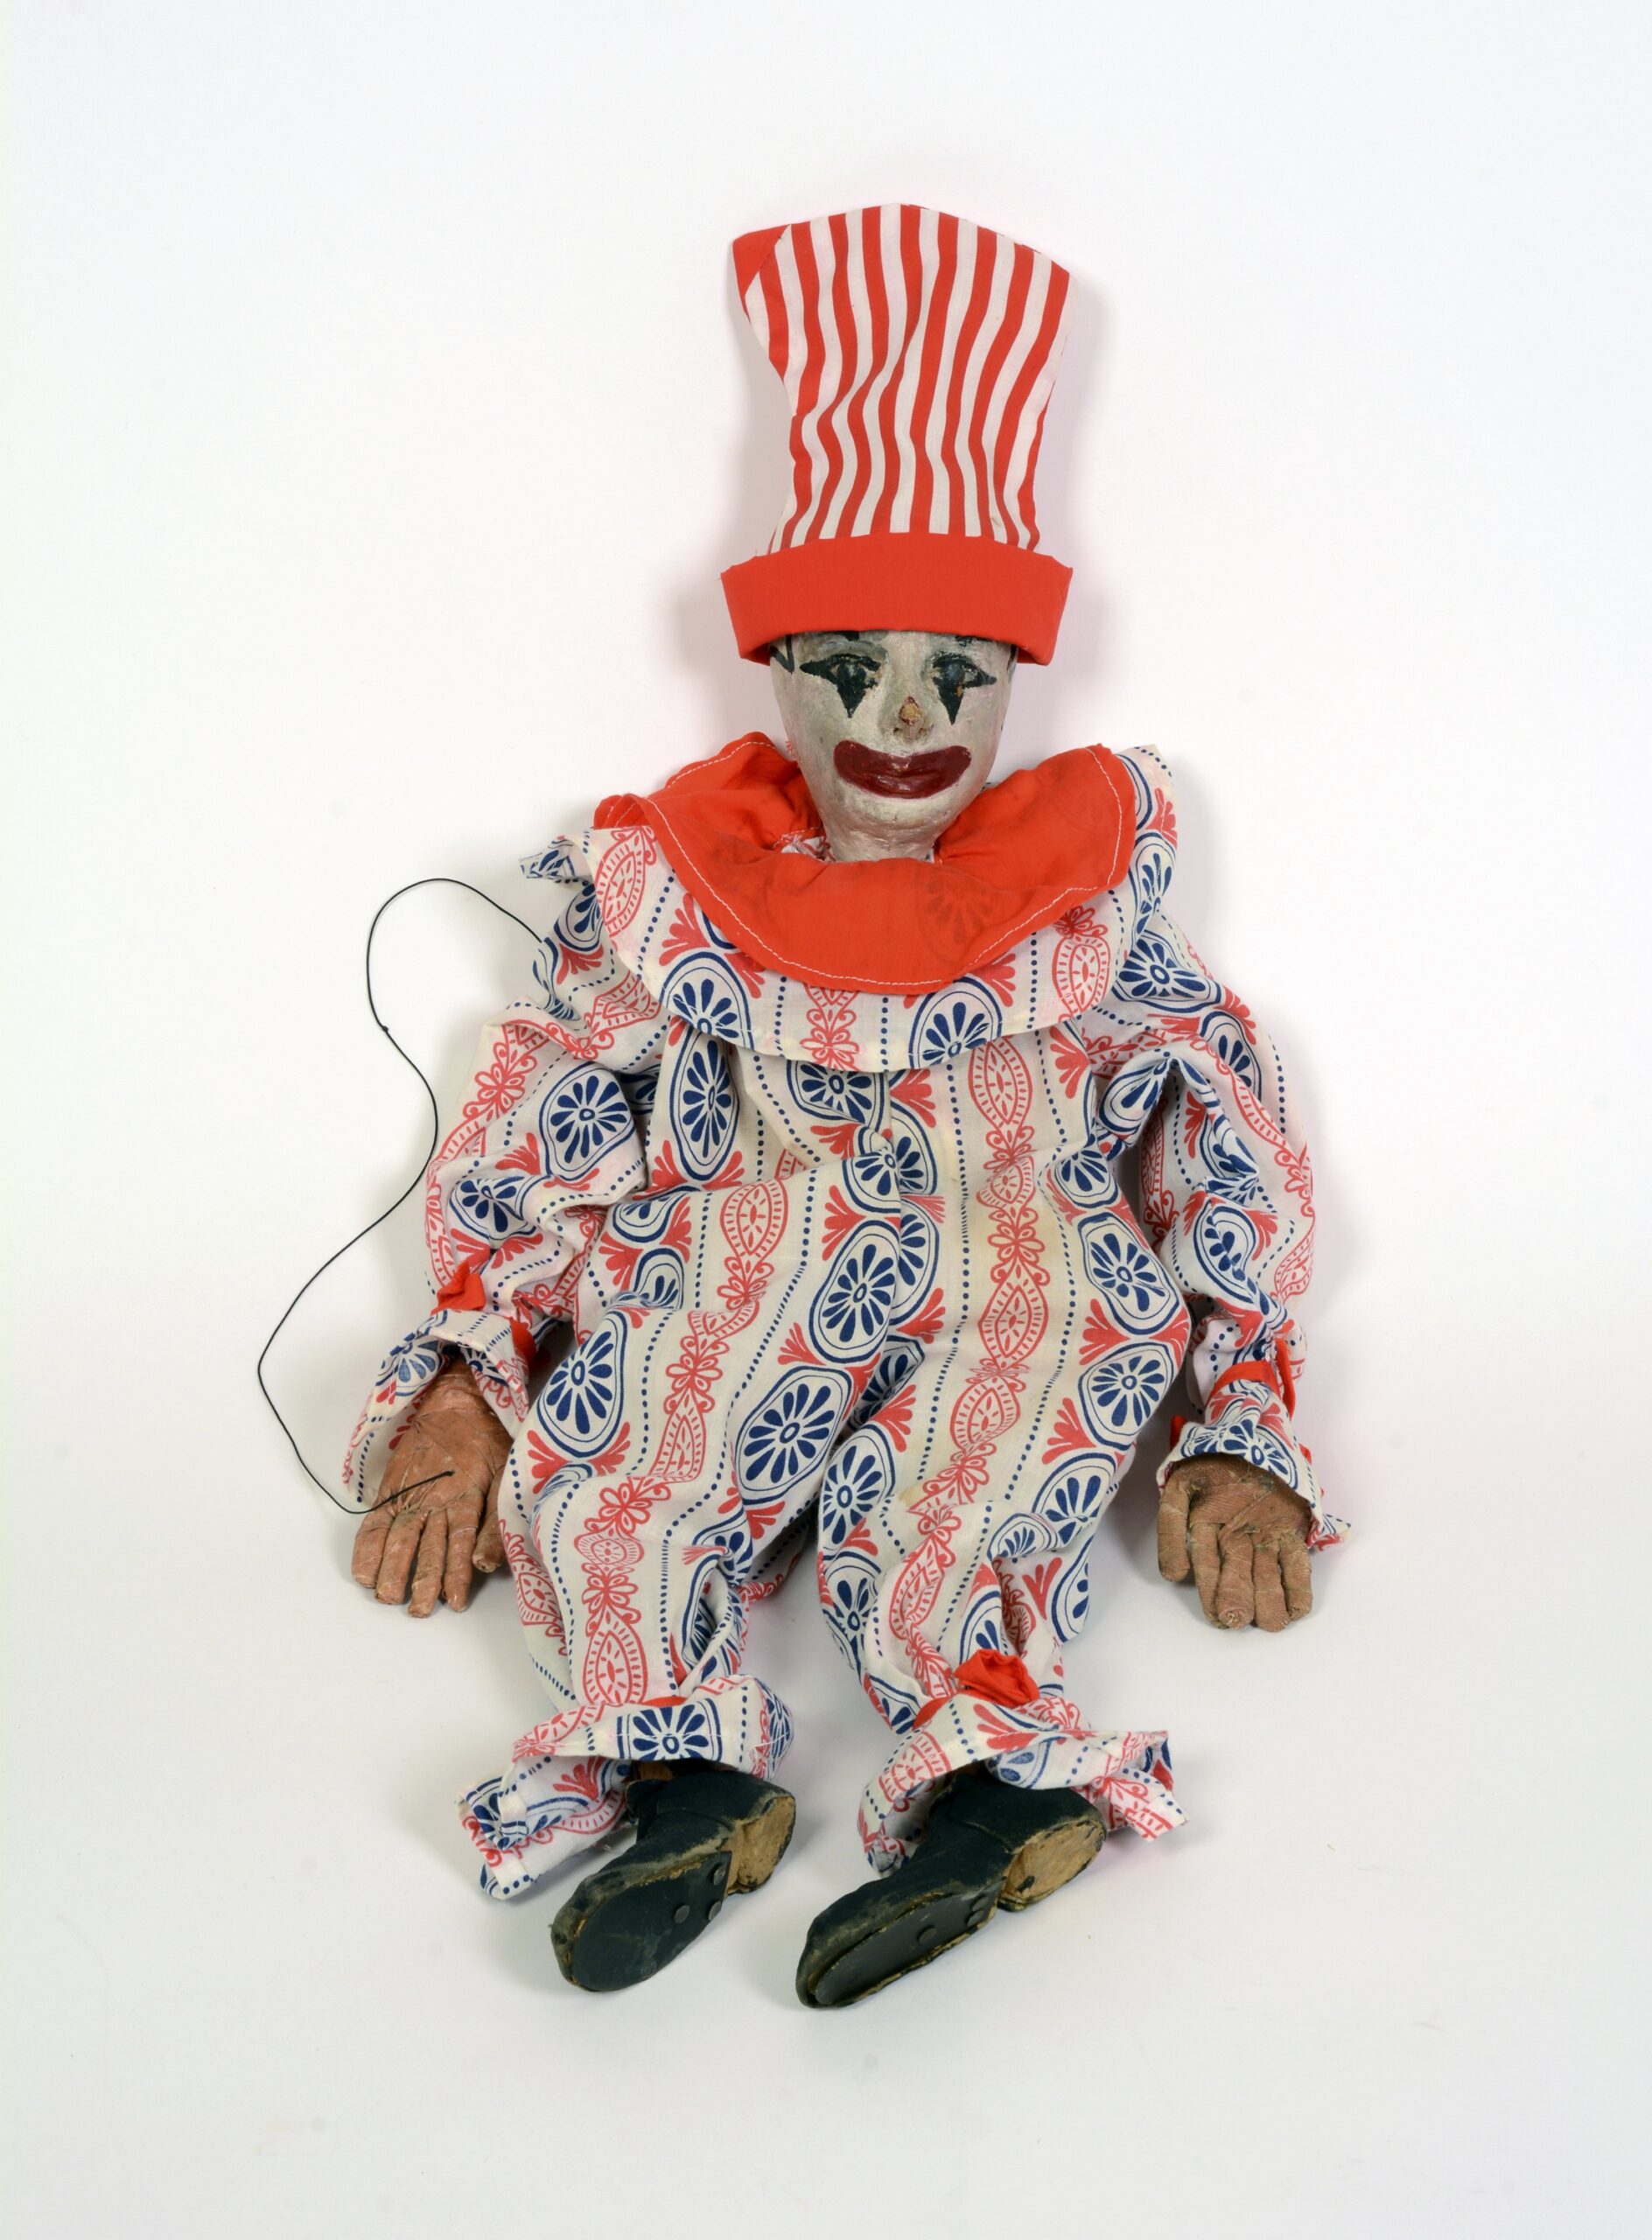 A clown puppet with a painted face wears a baggy red, white and blue suit with a large, ruffled collar. A red and white striped top hat completes the ensemble.